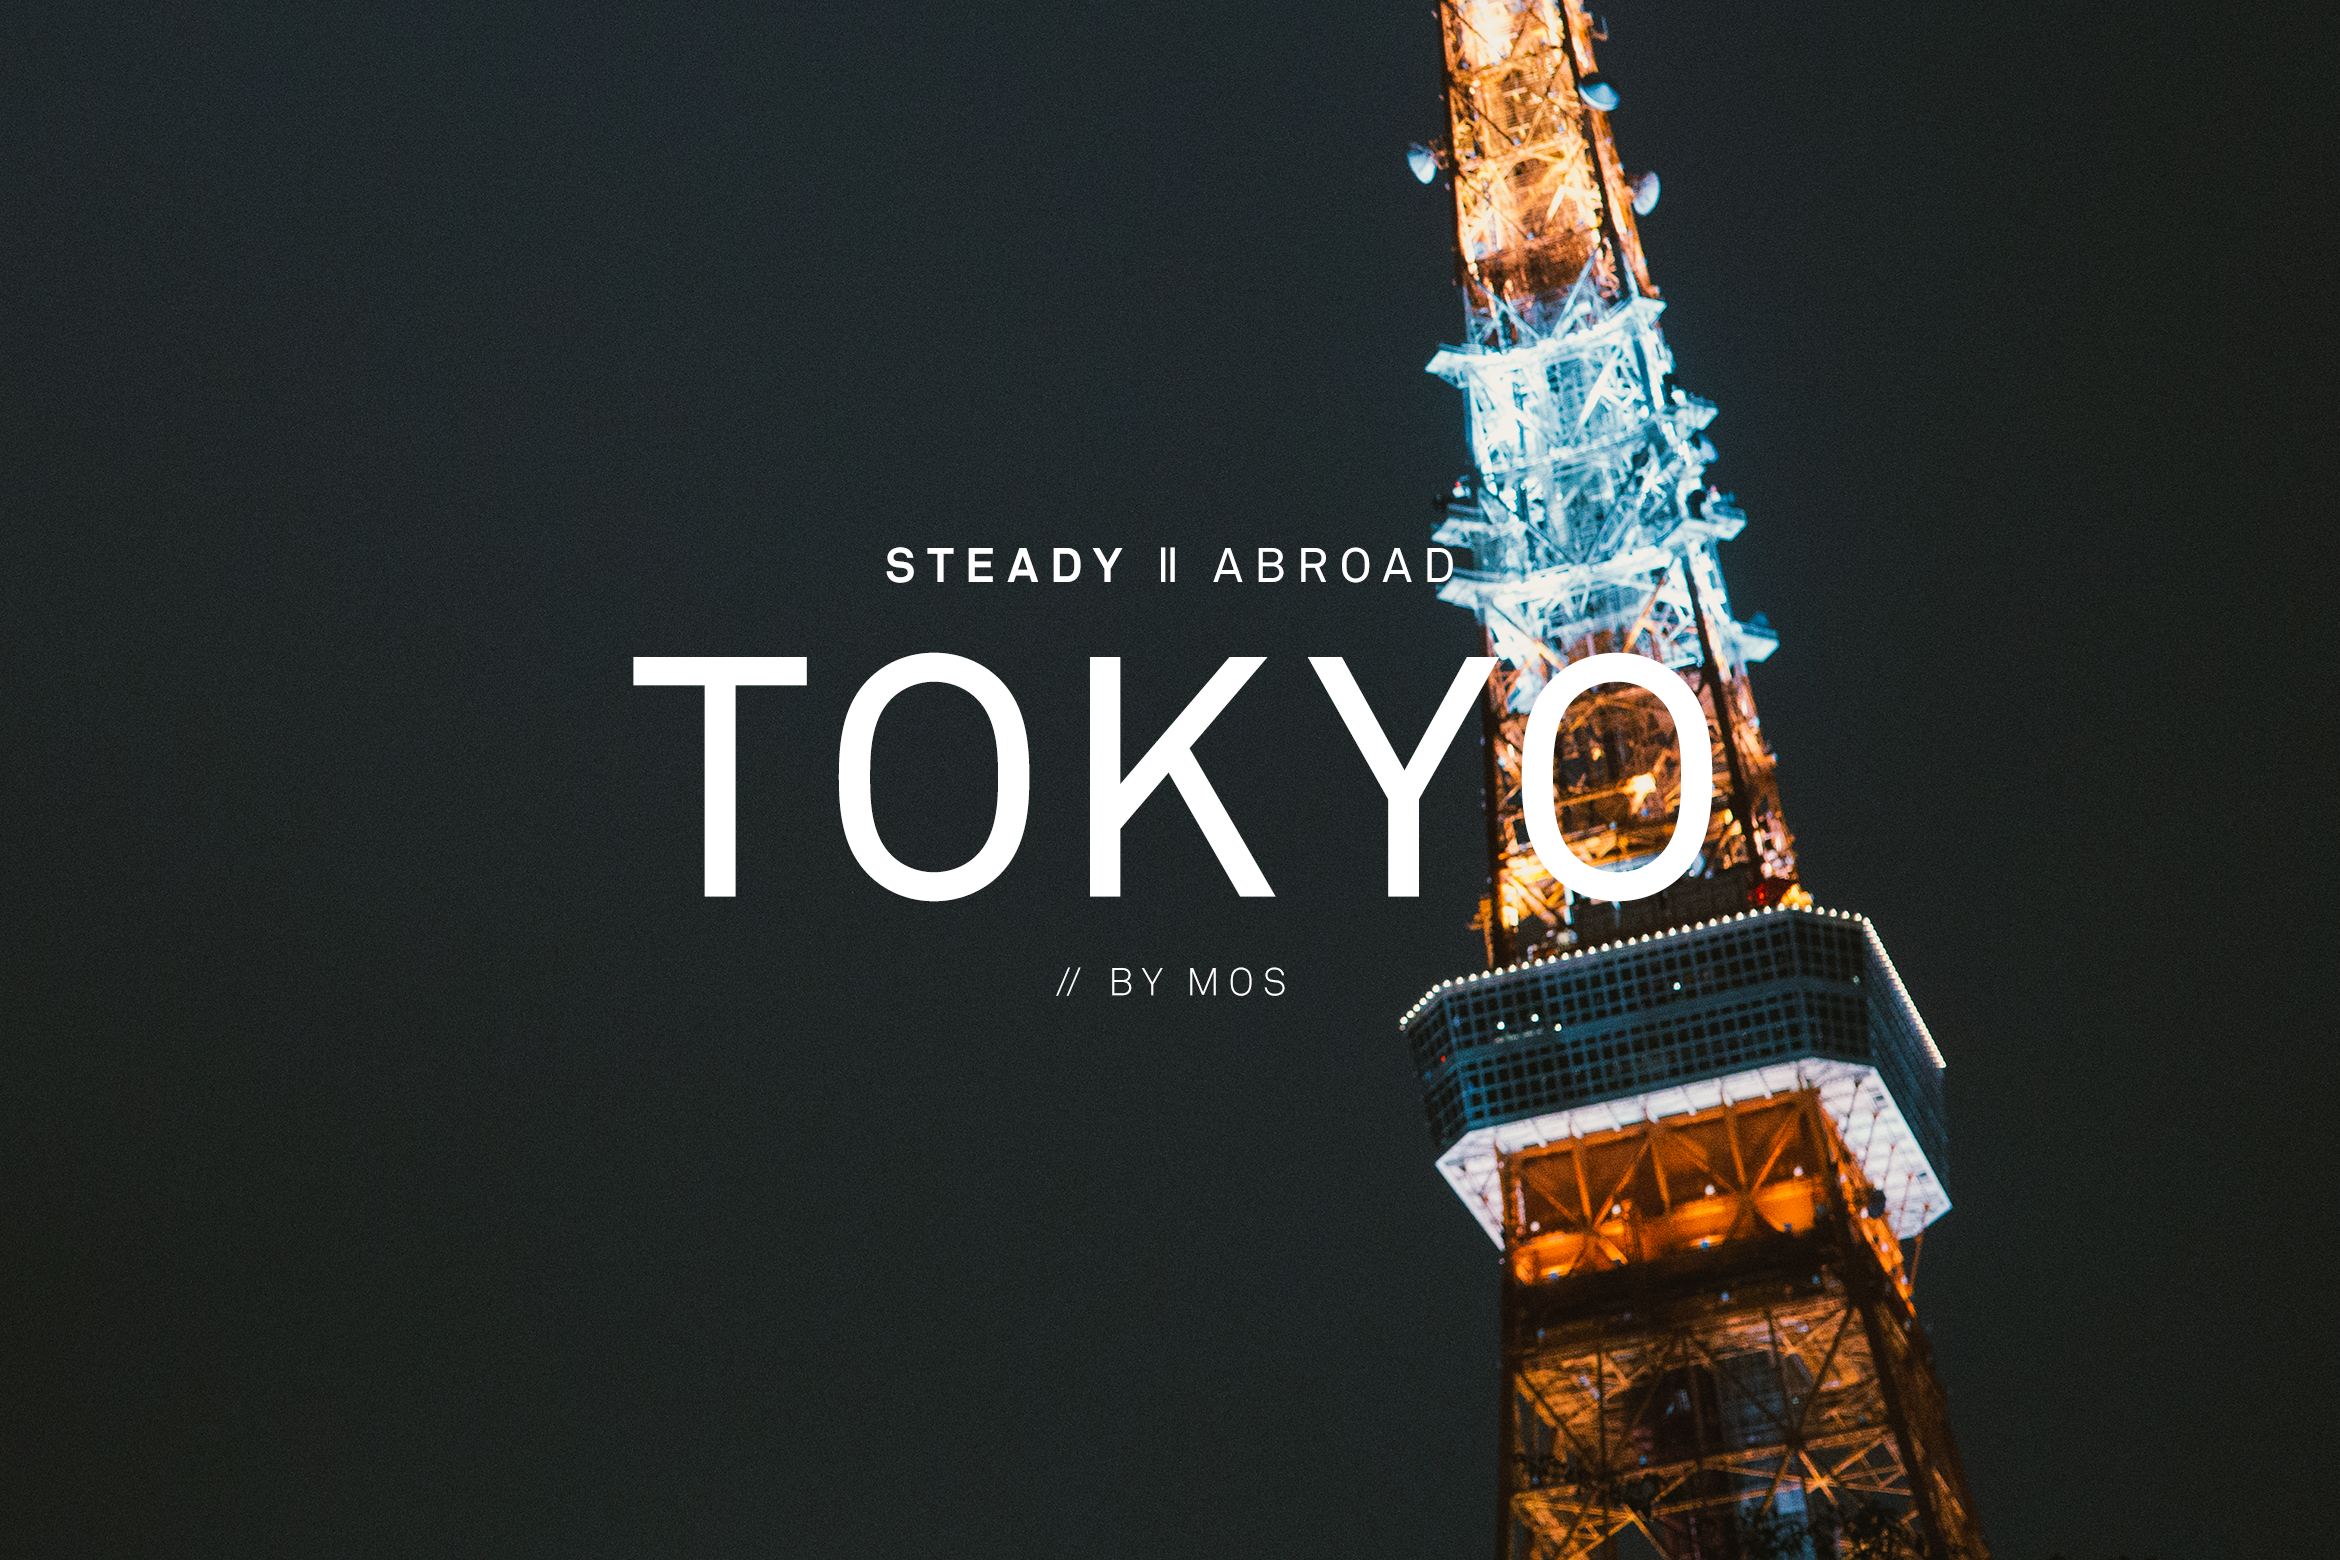 STEADY ABROAD: TOKYO // BY MOS